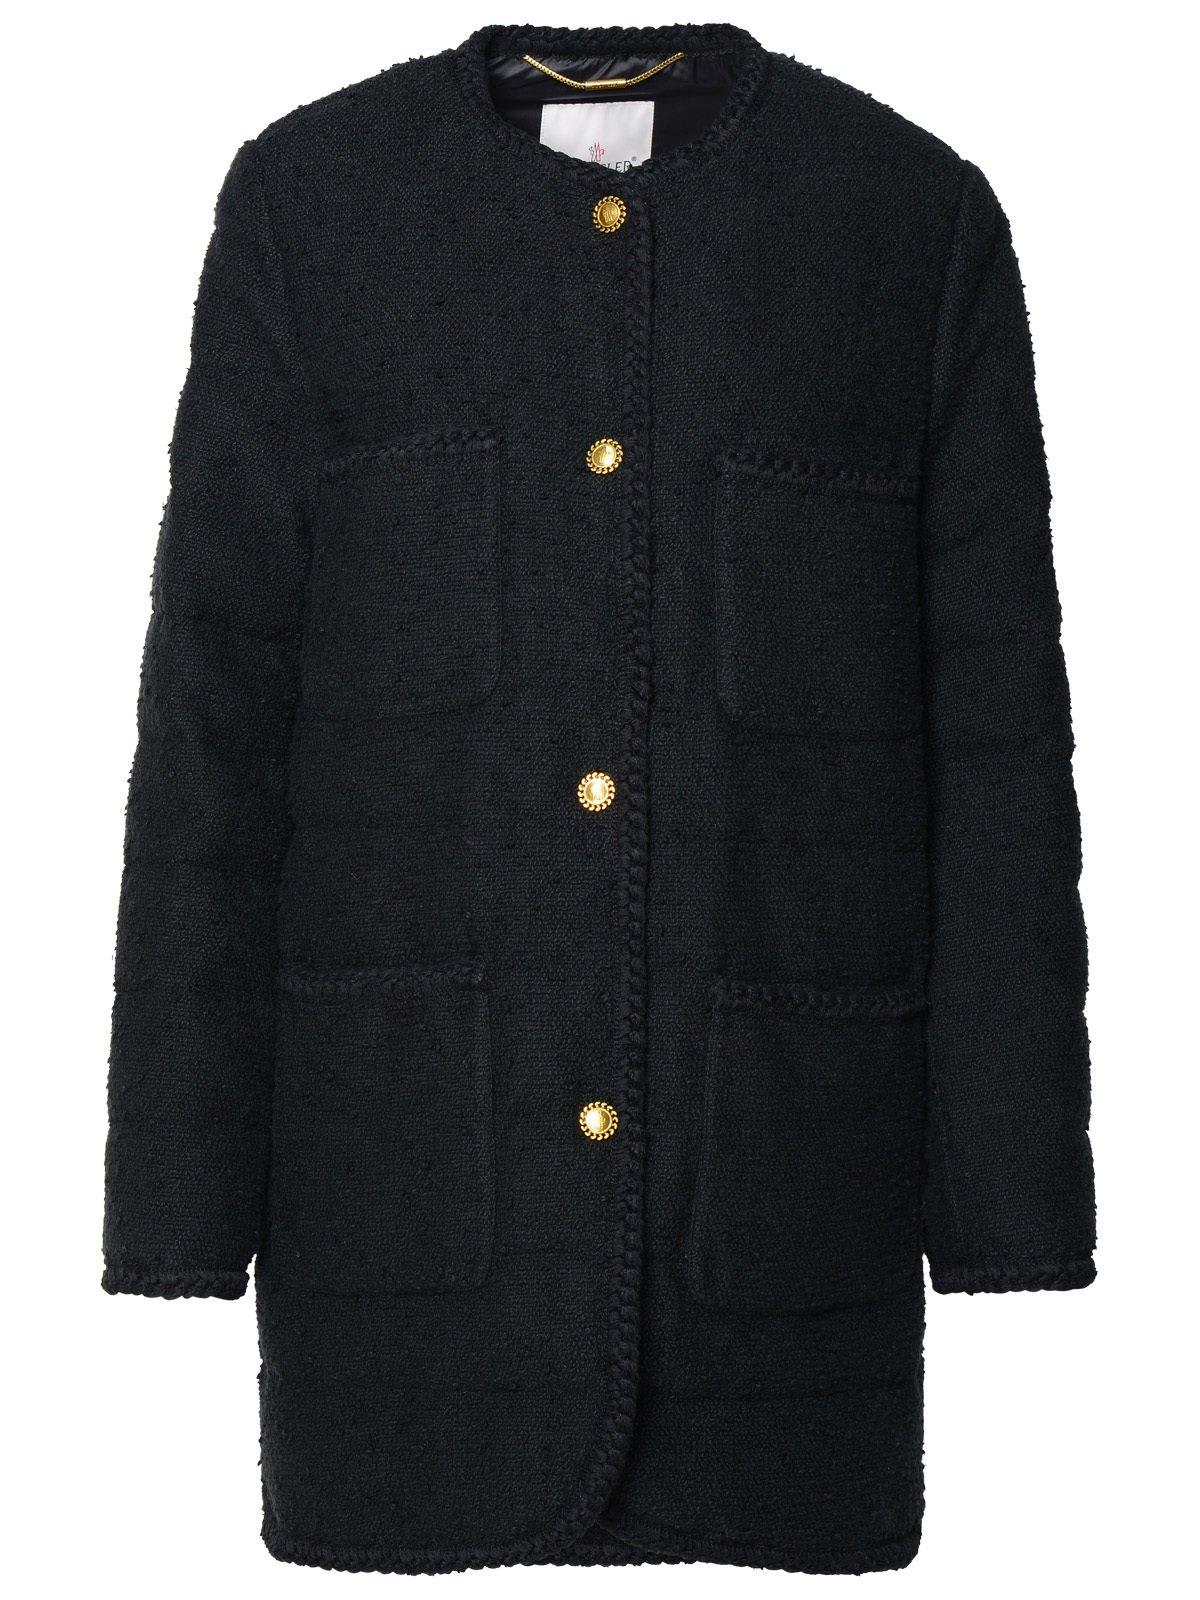 MONCLER BUTTON-UP BRAID DETAILED JACKET